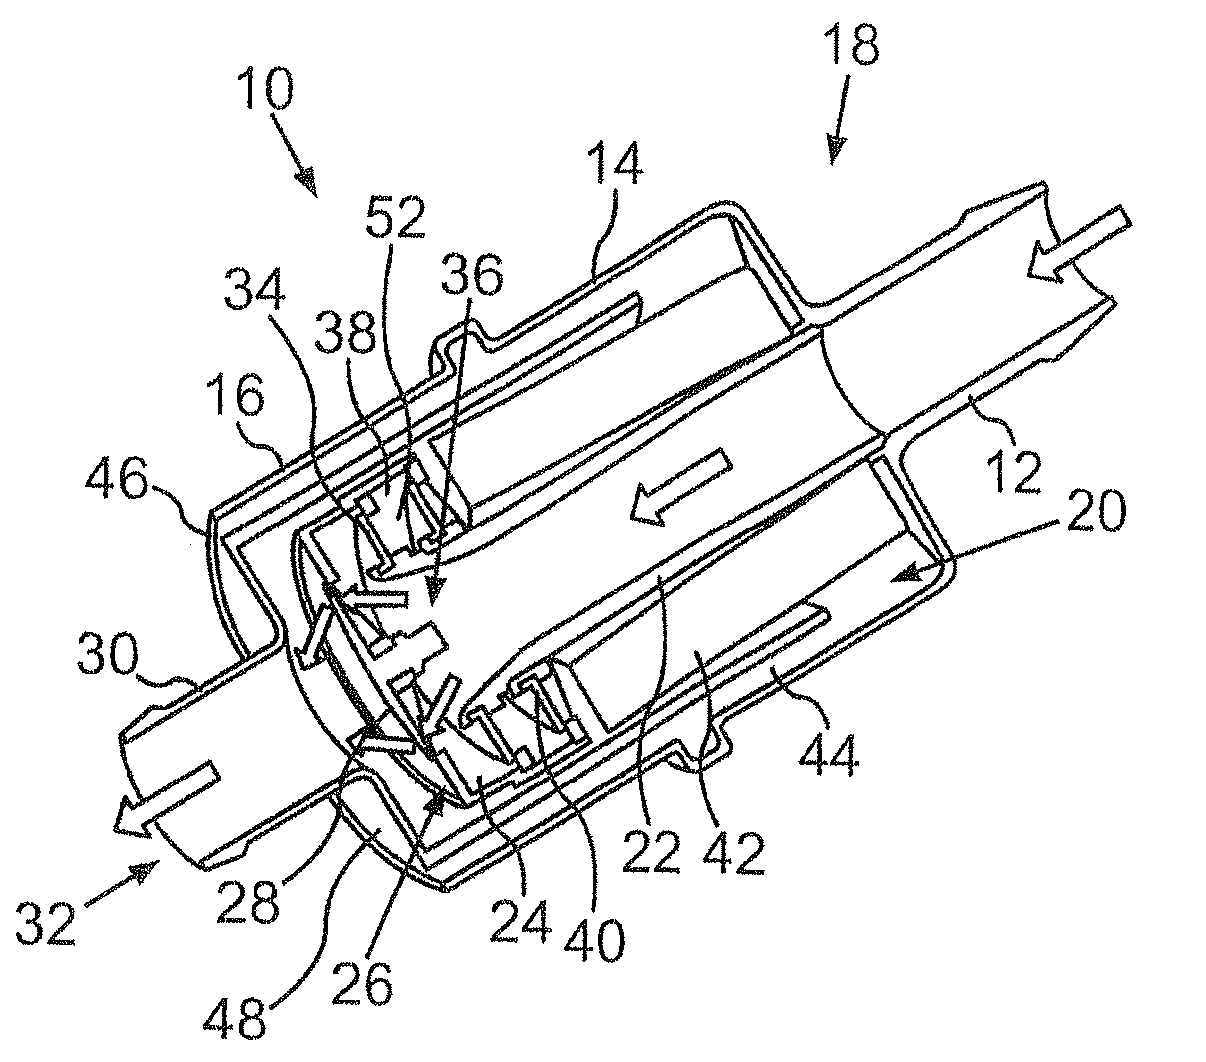 Device for aeration and ventilation of a fuel system